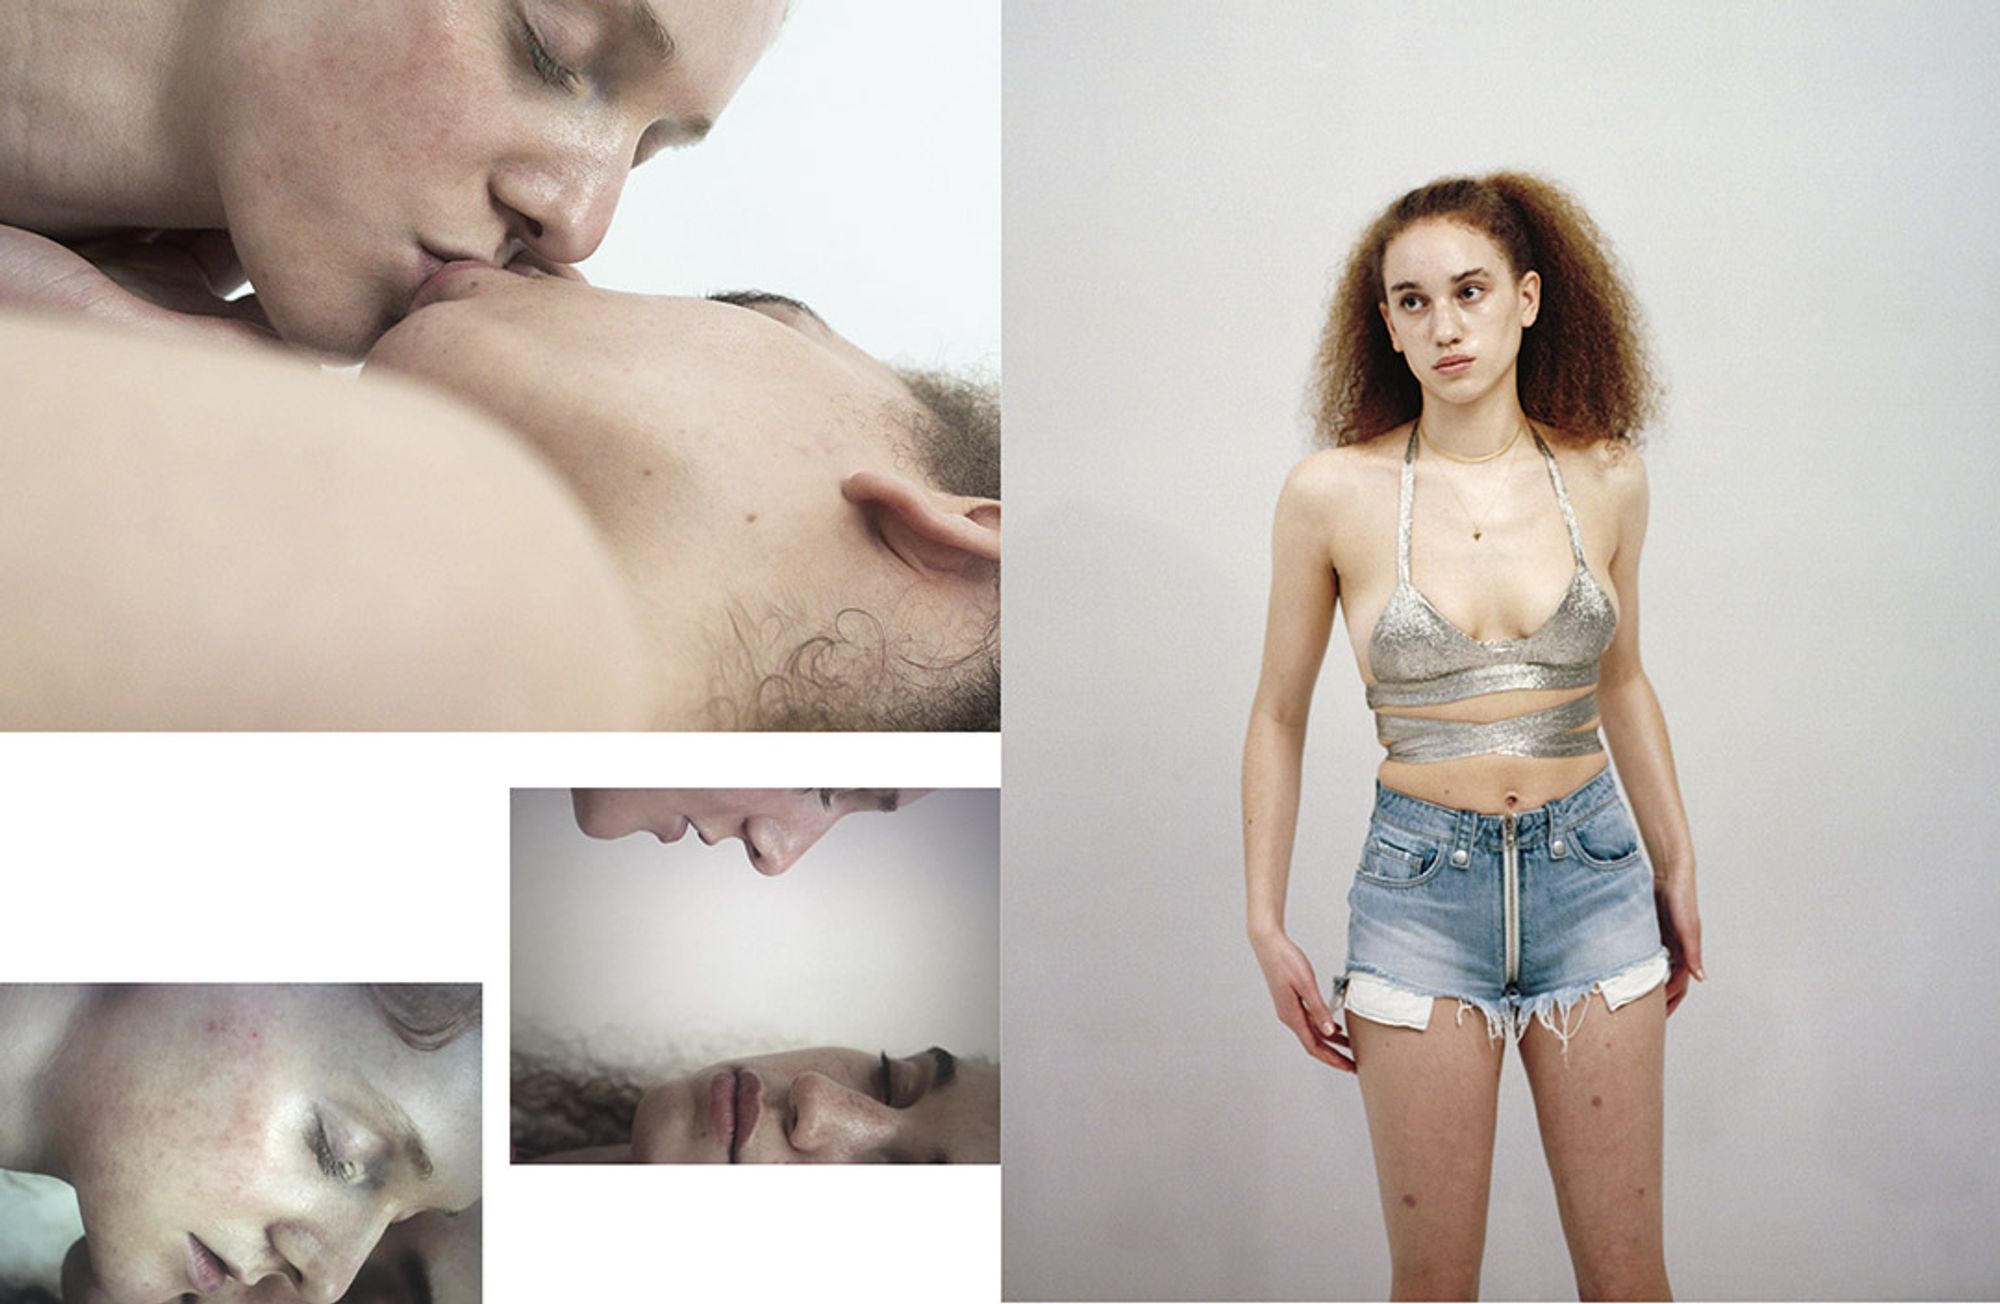 CREATIVE DIRECTION – EDITORIAL DIRECTION ISSUE 02 TEENAGER LIEBE